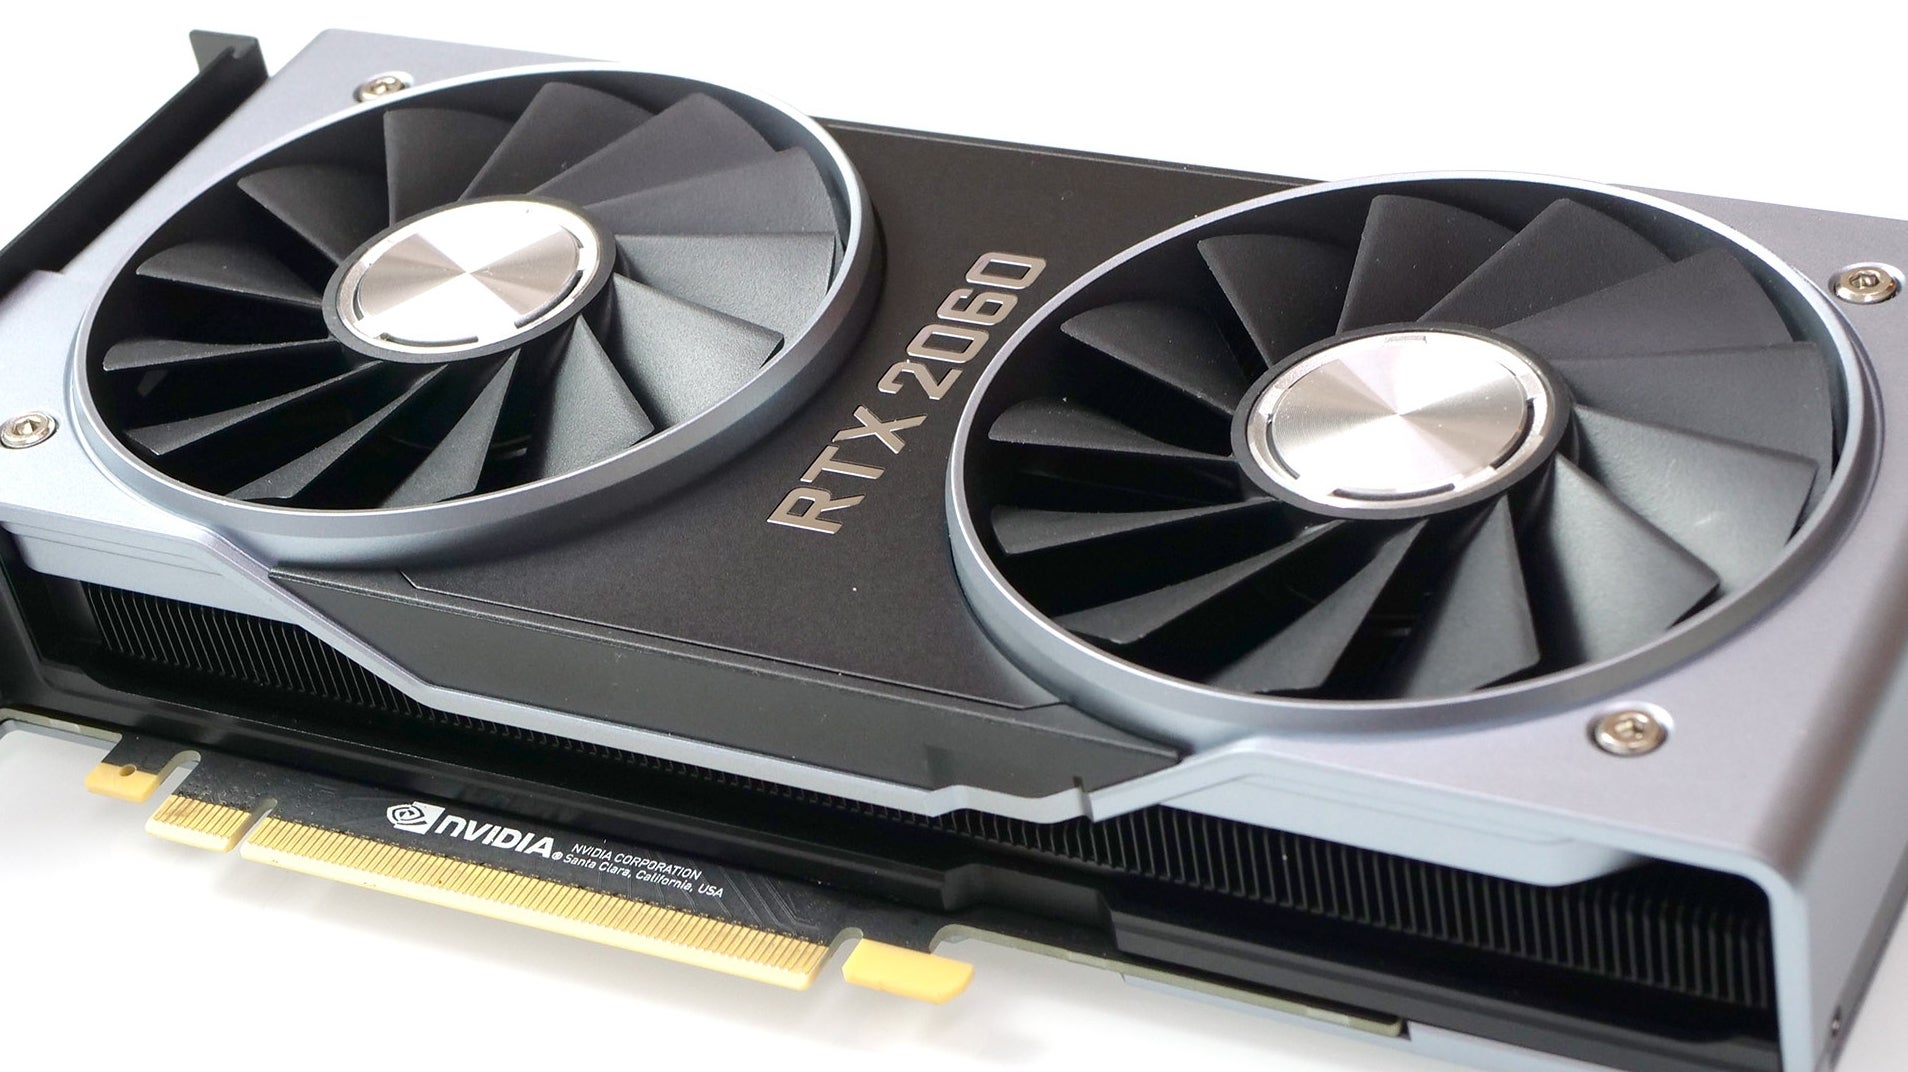 Nvidia GeForce RTX 2060: Ray tracing comes to the mainstream 